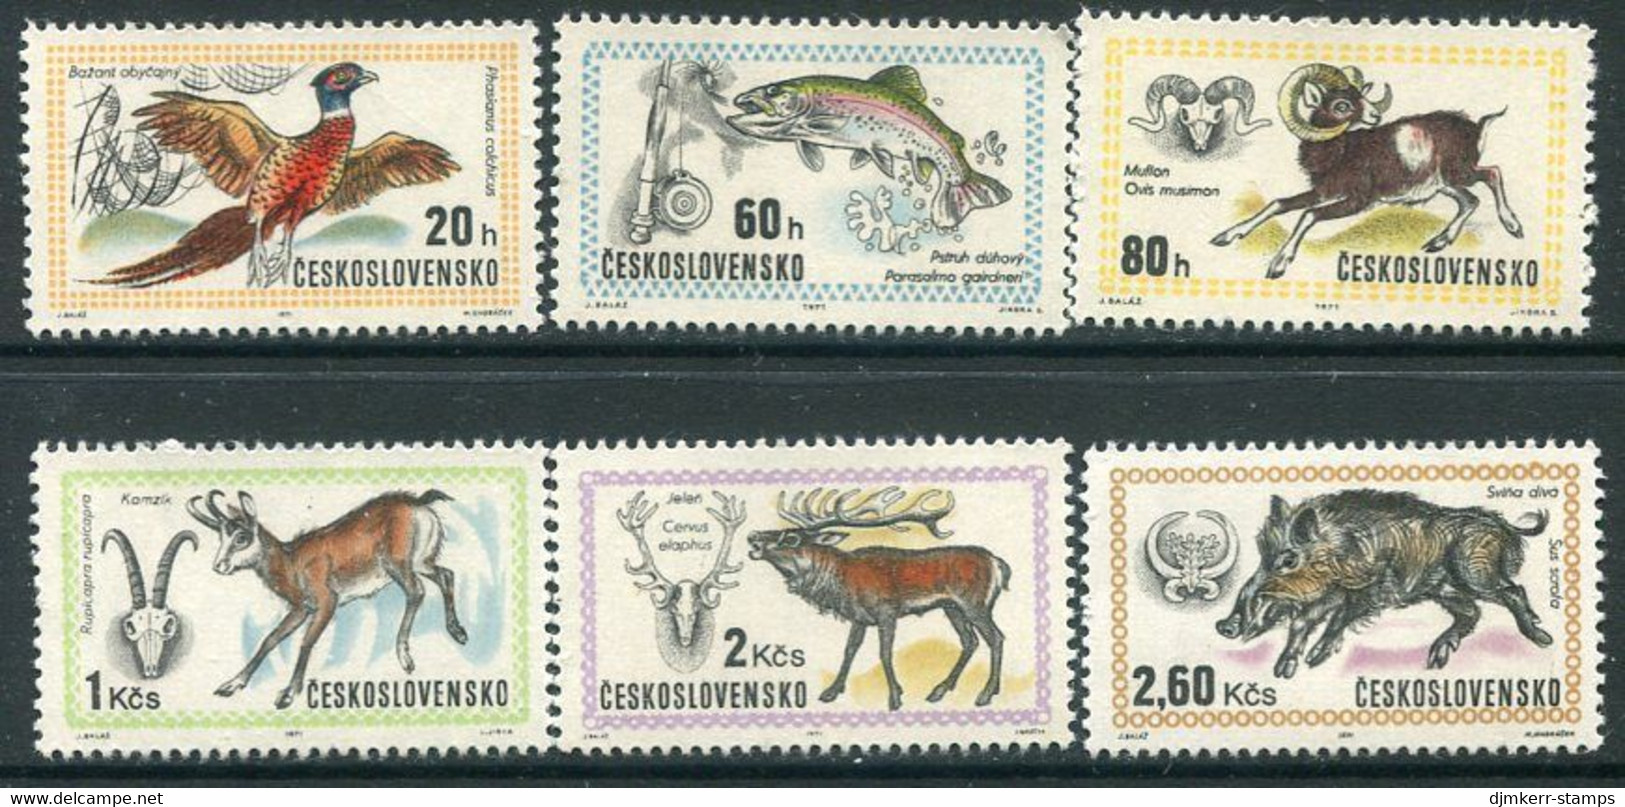 CZECHOSLOVAKIA 1971 Hunting Exhibition MNH / **  Michel 2014-19 - Unused Stamps